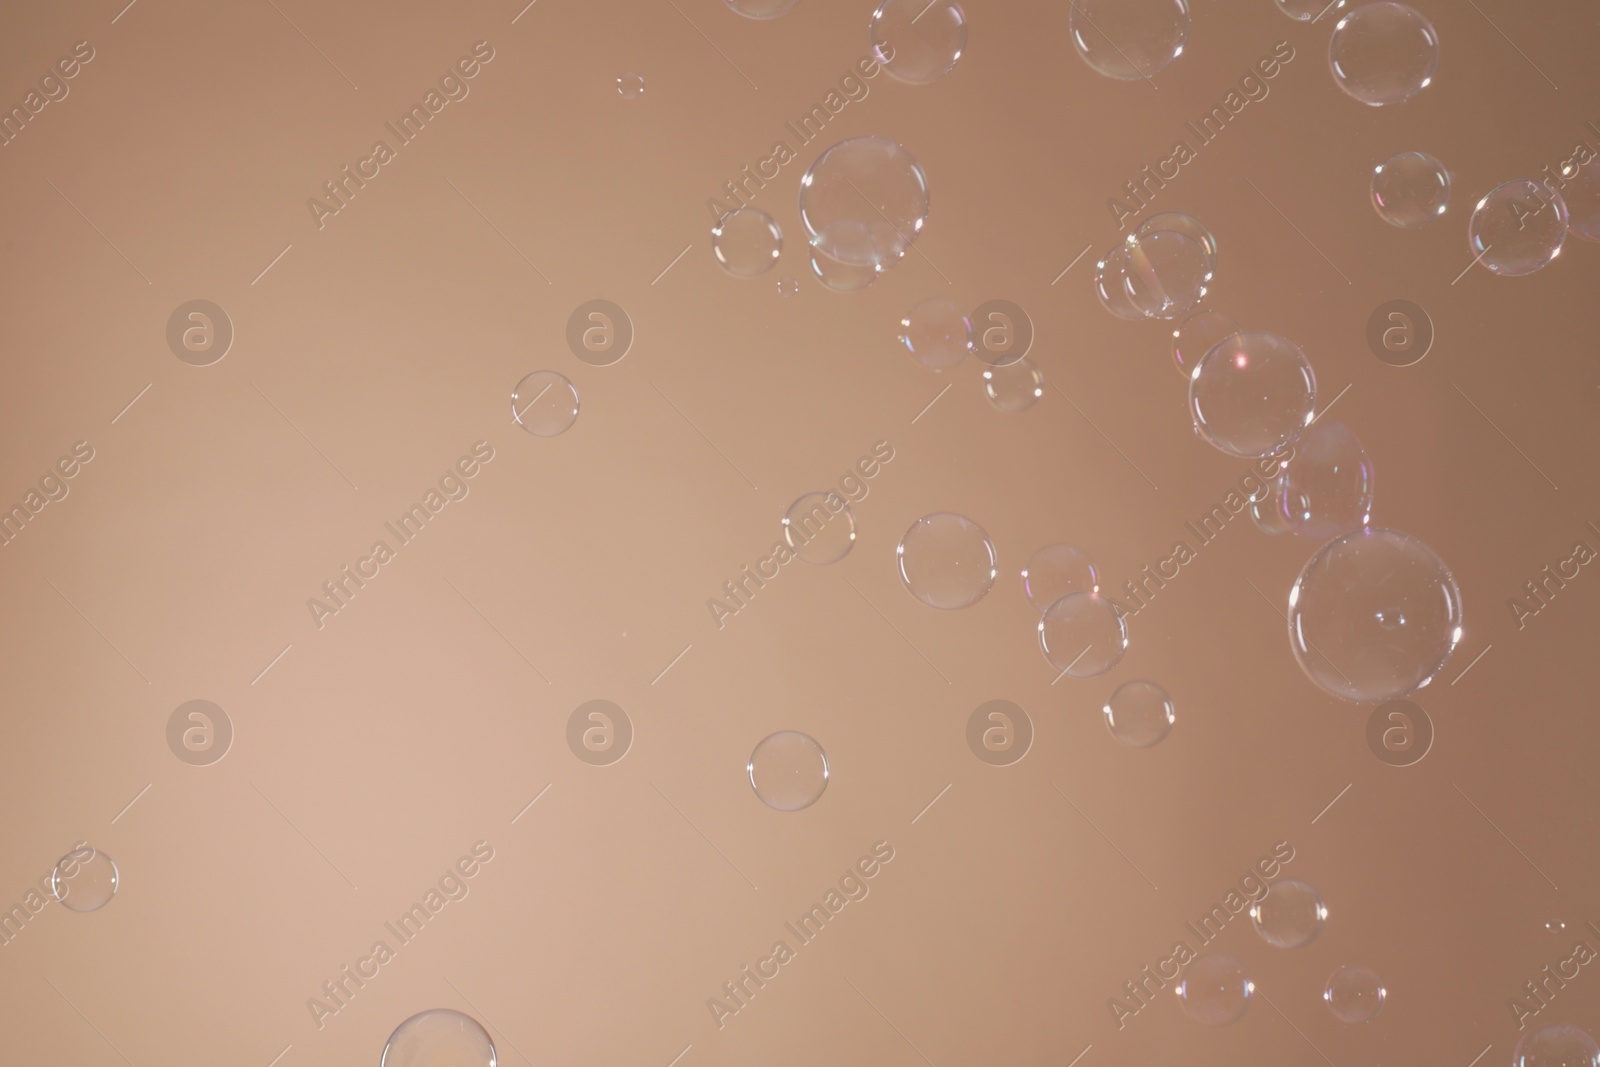 Photo of Many beautiful soap bubbles on light brown background